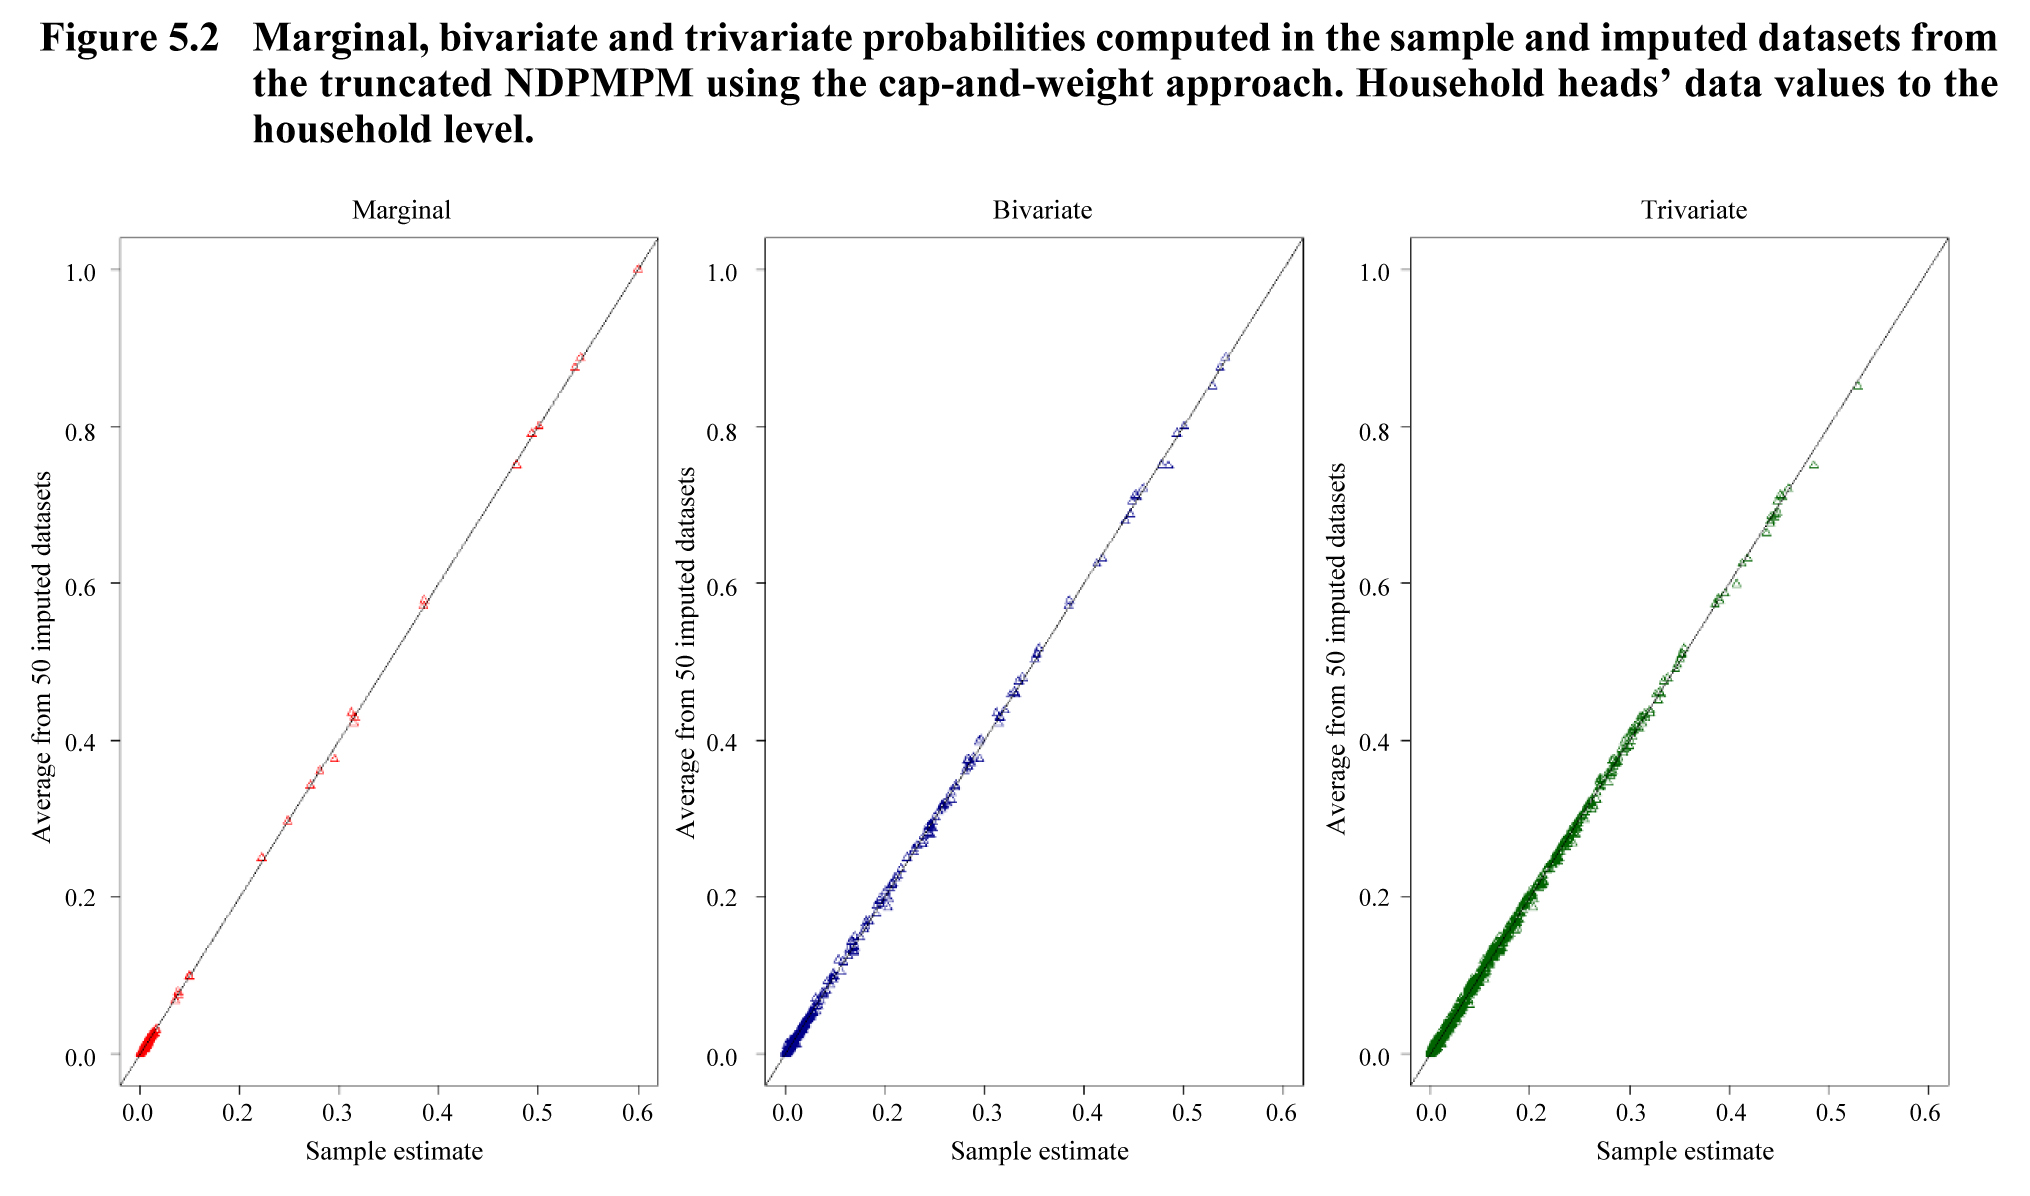 Figure 5.2 Marginal, bivariate and trivariate probabilities computed in the sample and imputed datasets from the truncated NDPMPM using the cap-and-weight approach. Household heads’ data values to the household level